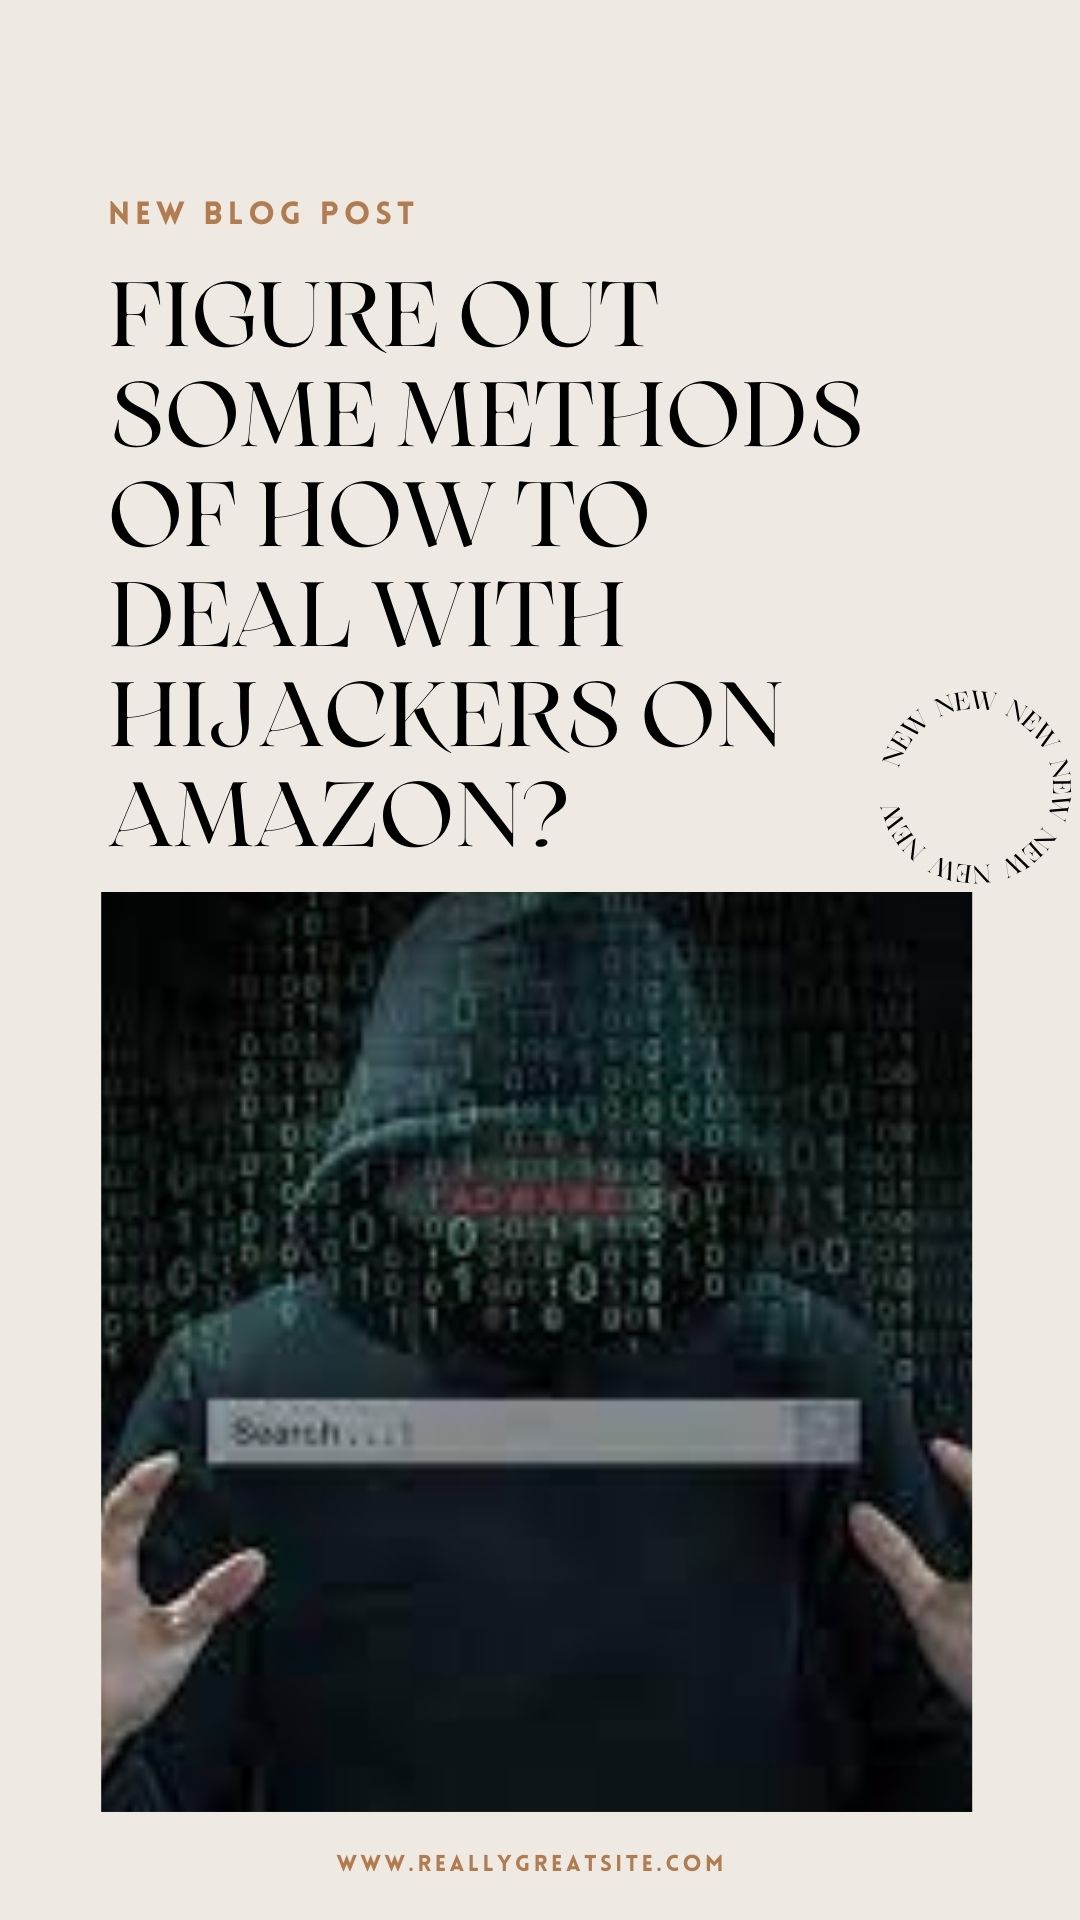 Figure Out Some Methods of How to Deal with Hijackers on Amazon?